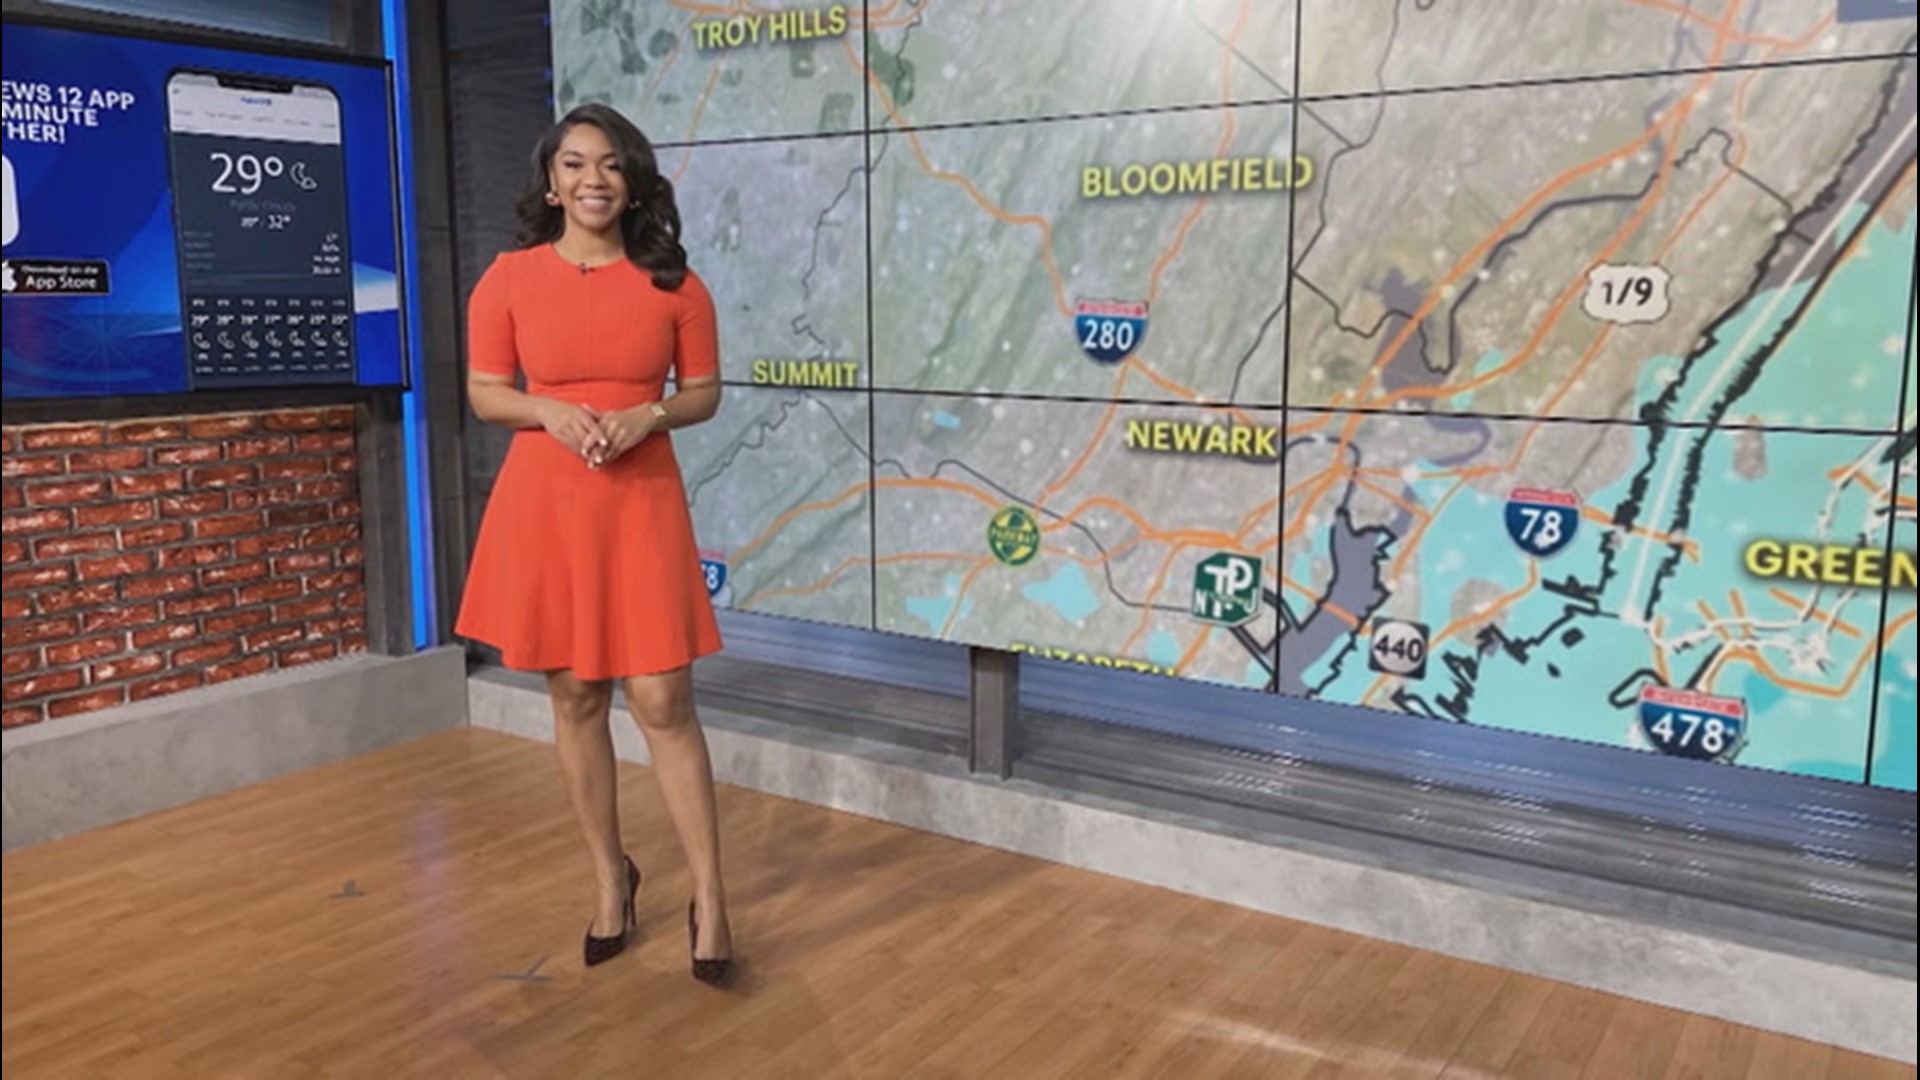 AccuWeather's Dexter Henry connects with a meteorologist who is inspiring young women with her work.